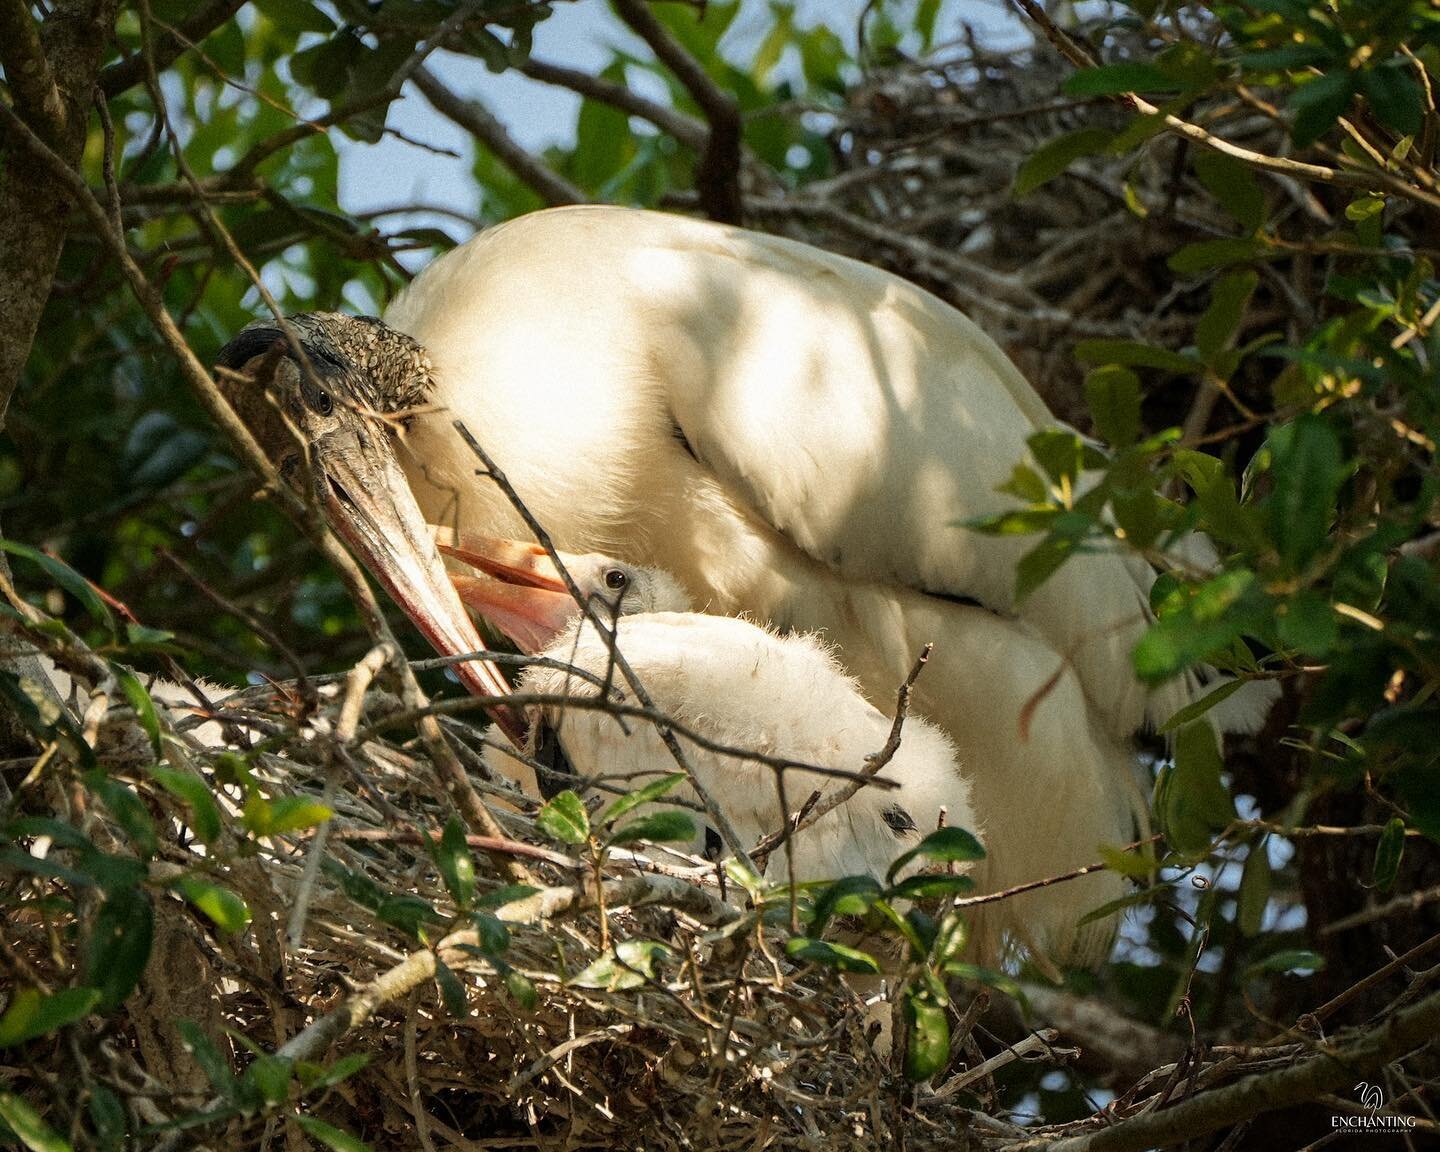 2 photos ↠ ↠ &ldquo;Mama and Baby&rdquo; wood storks &hellip; 1- cuddle up 2 - nap time for mama &hellip; always so hard to get pics of the wood stork chicks until they are a little bigger because of the nests being up higher. Photos taken May 2023

